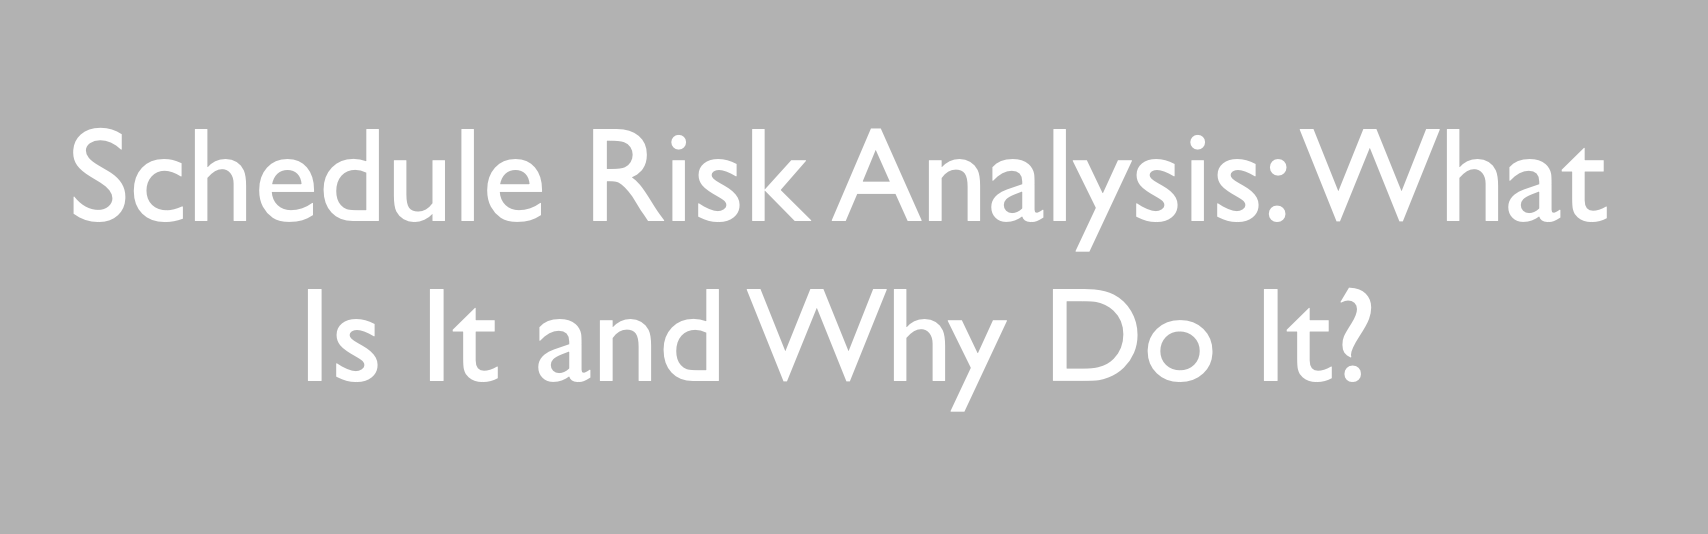 Schedule Risk Analysis - What Is It and Why Do It?